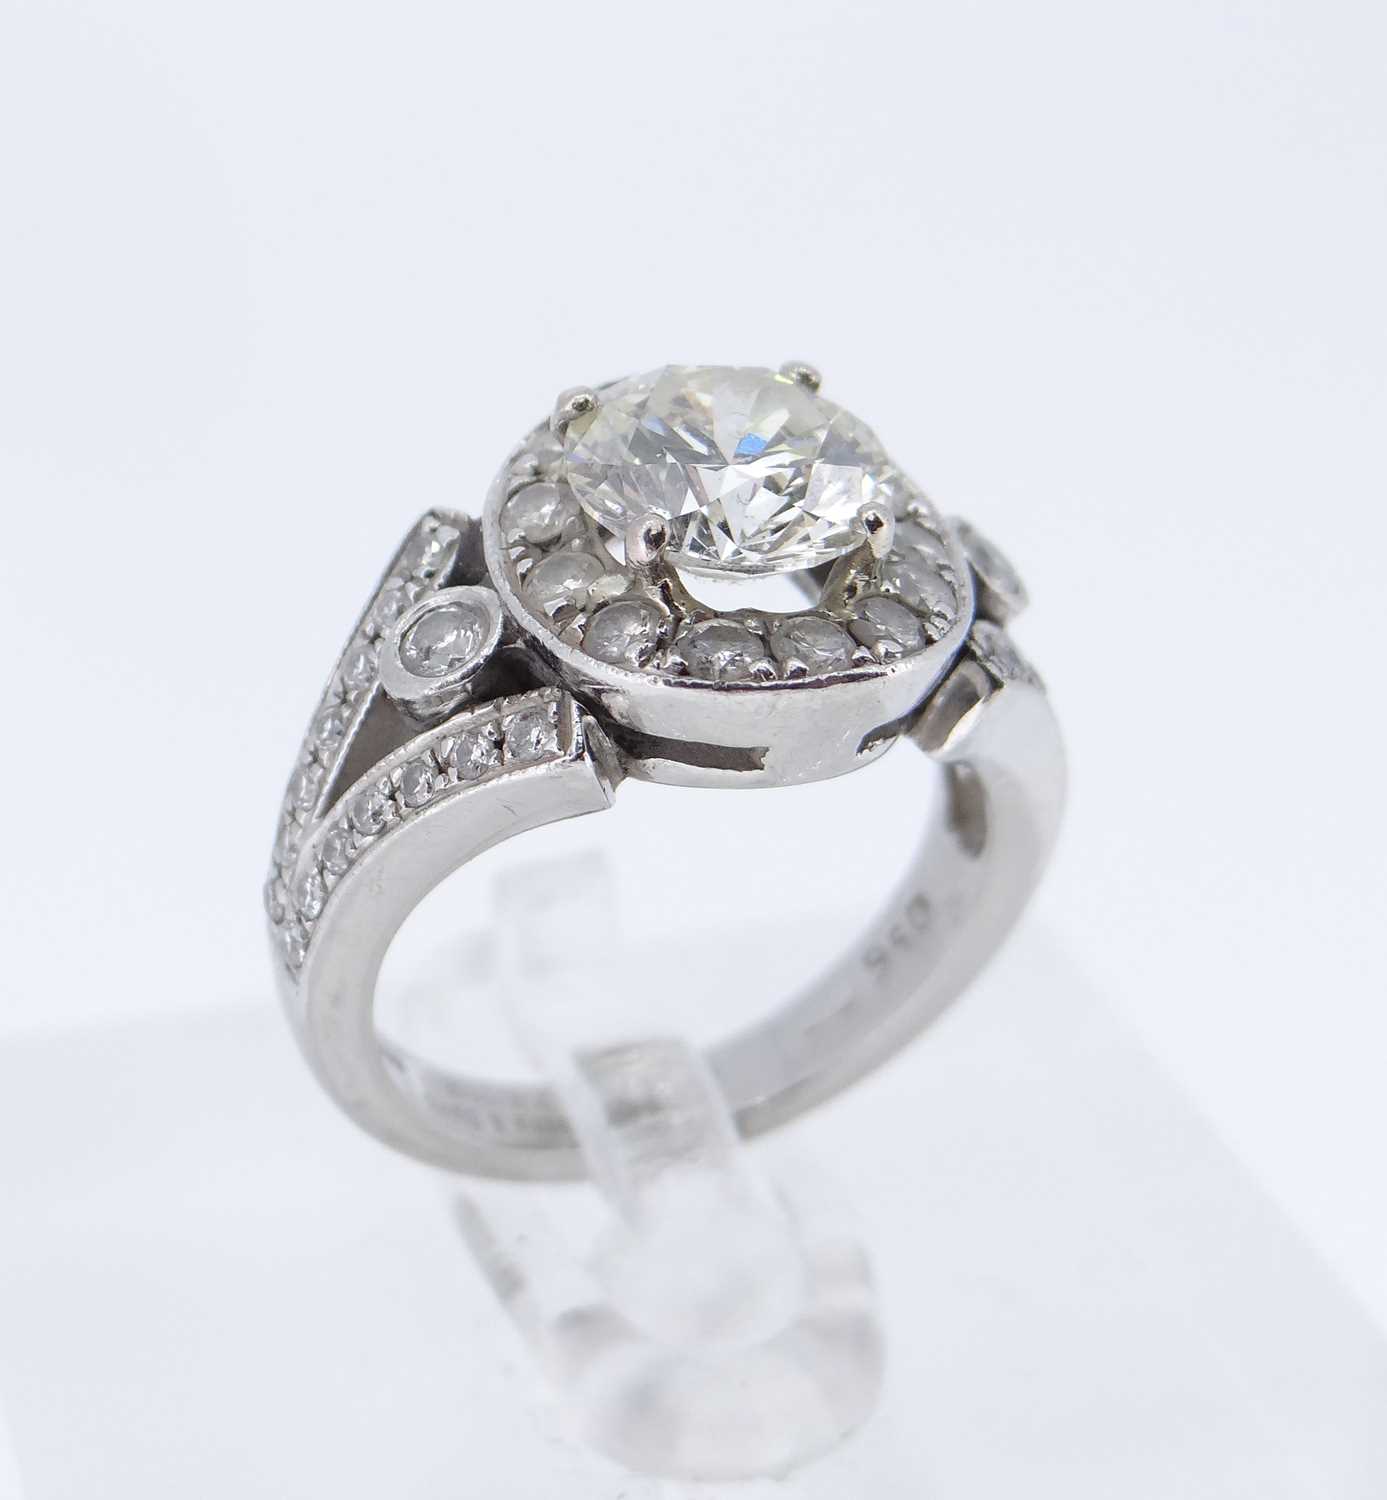 MODERN PLATINUM DIAMOND ENCRUSTED ENGAGEMENT RING & MATCHING WEDDING BAND, the central stone - Image 4 of 8